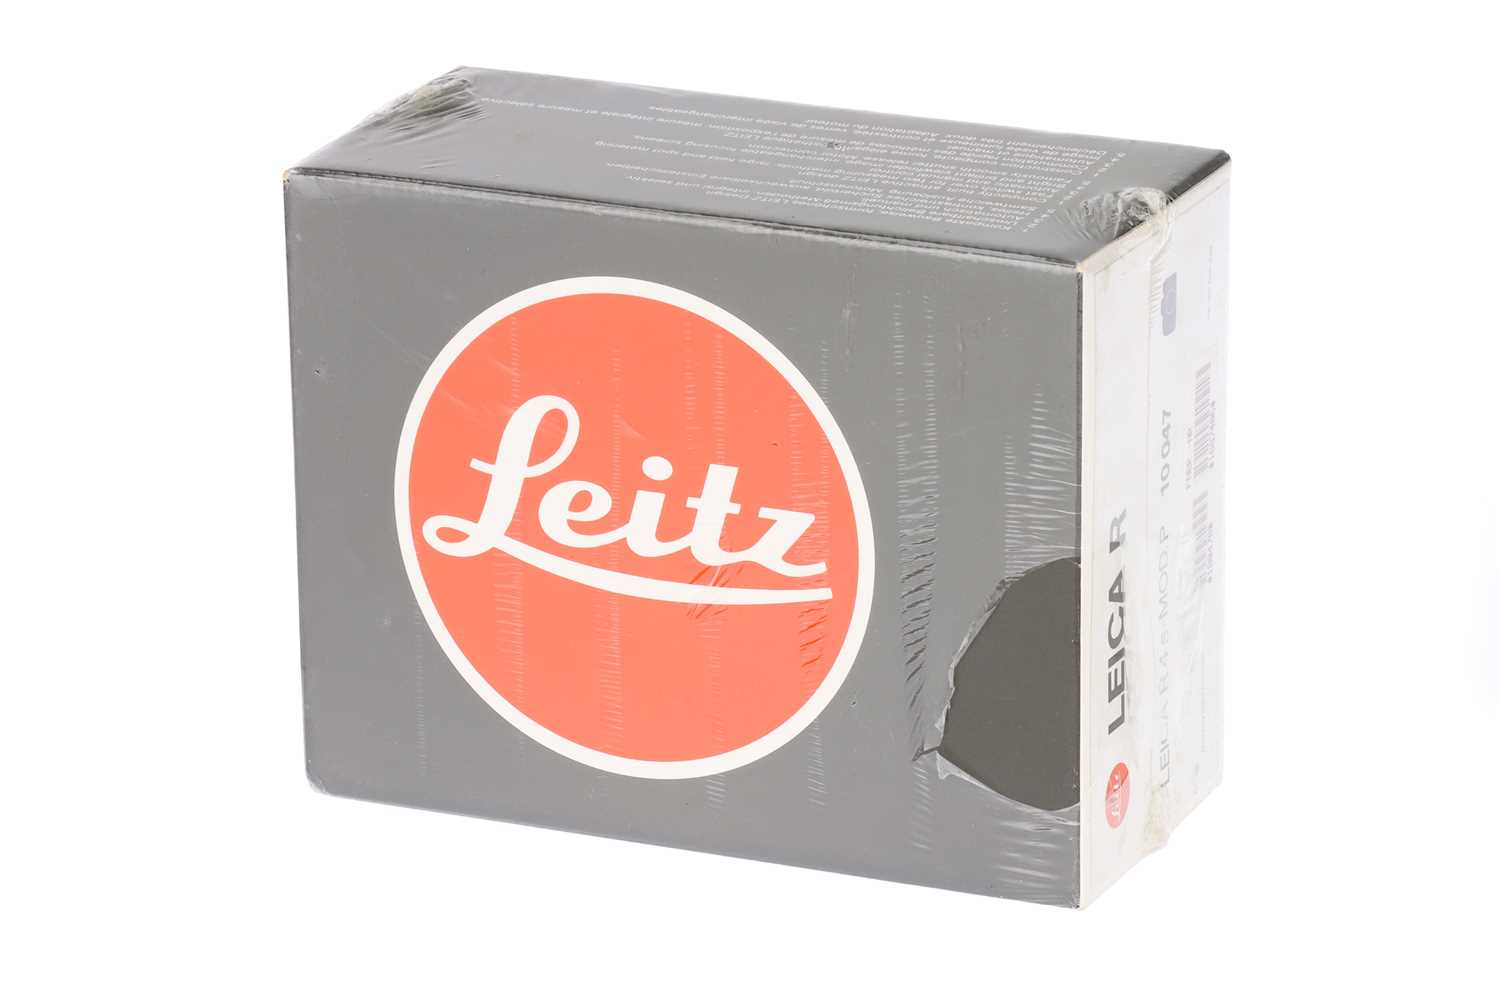 Lot 70 - A Leica R4s Factory Sealed SLR Body